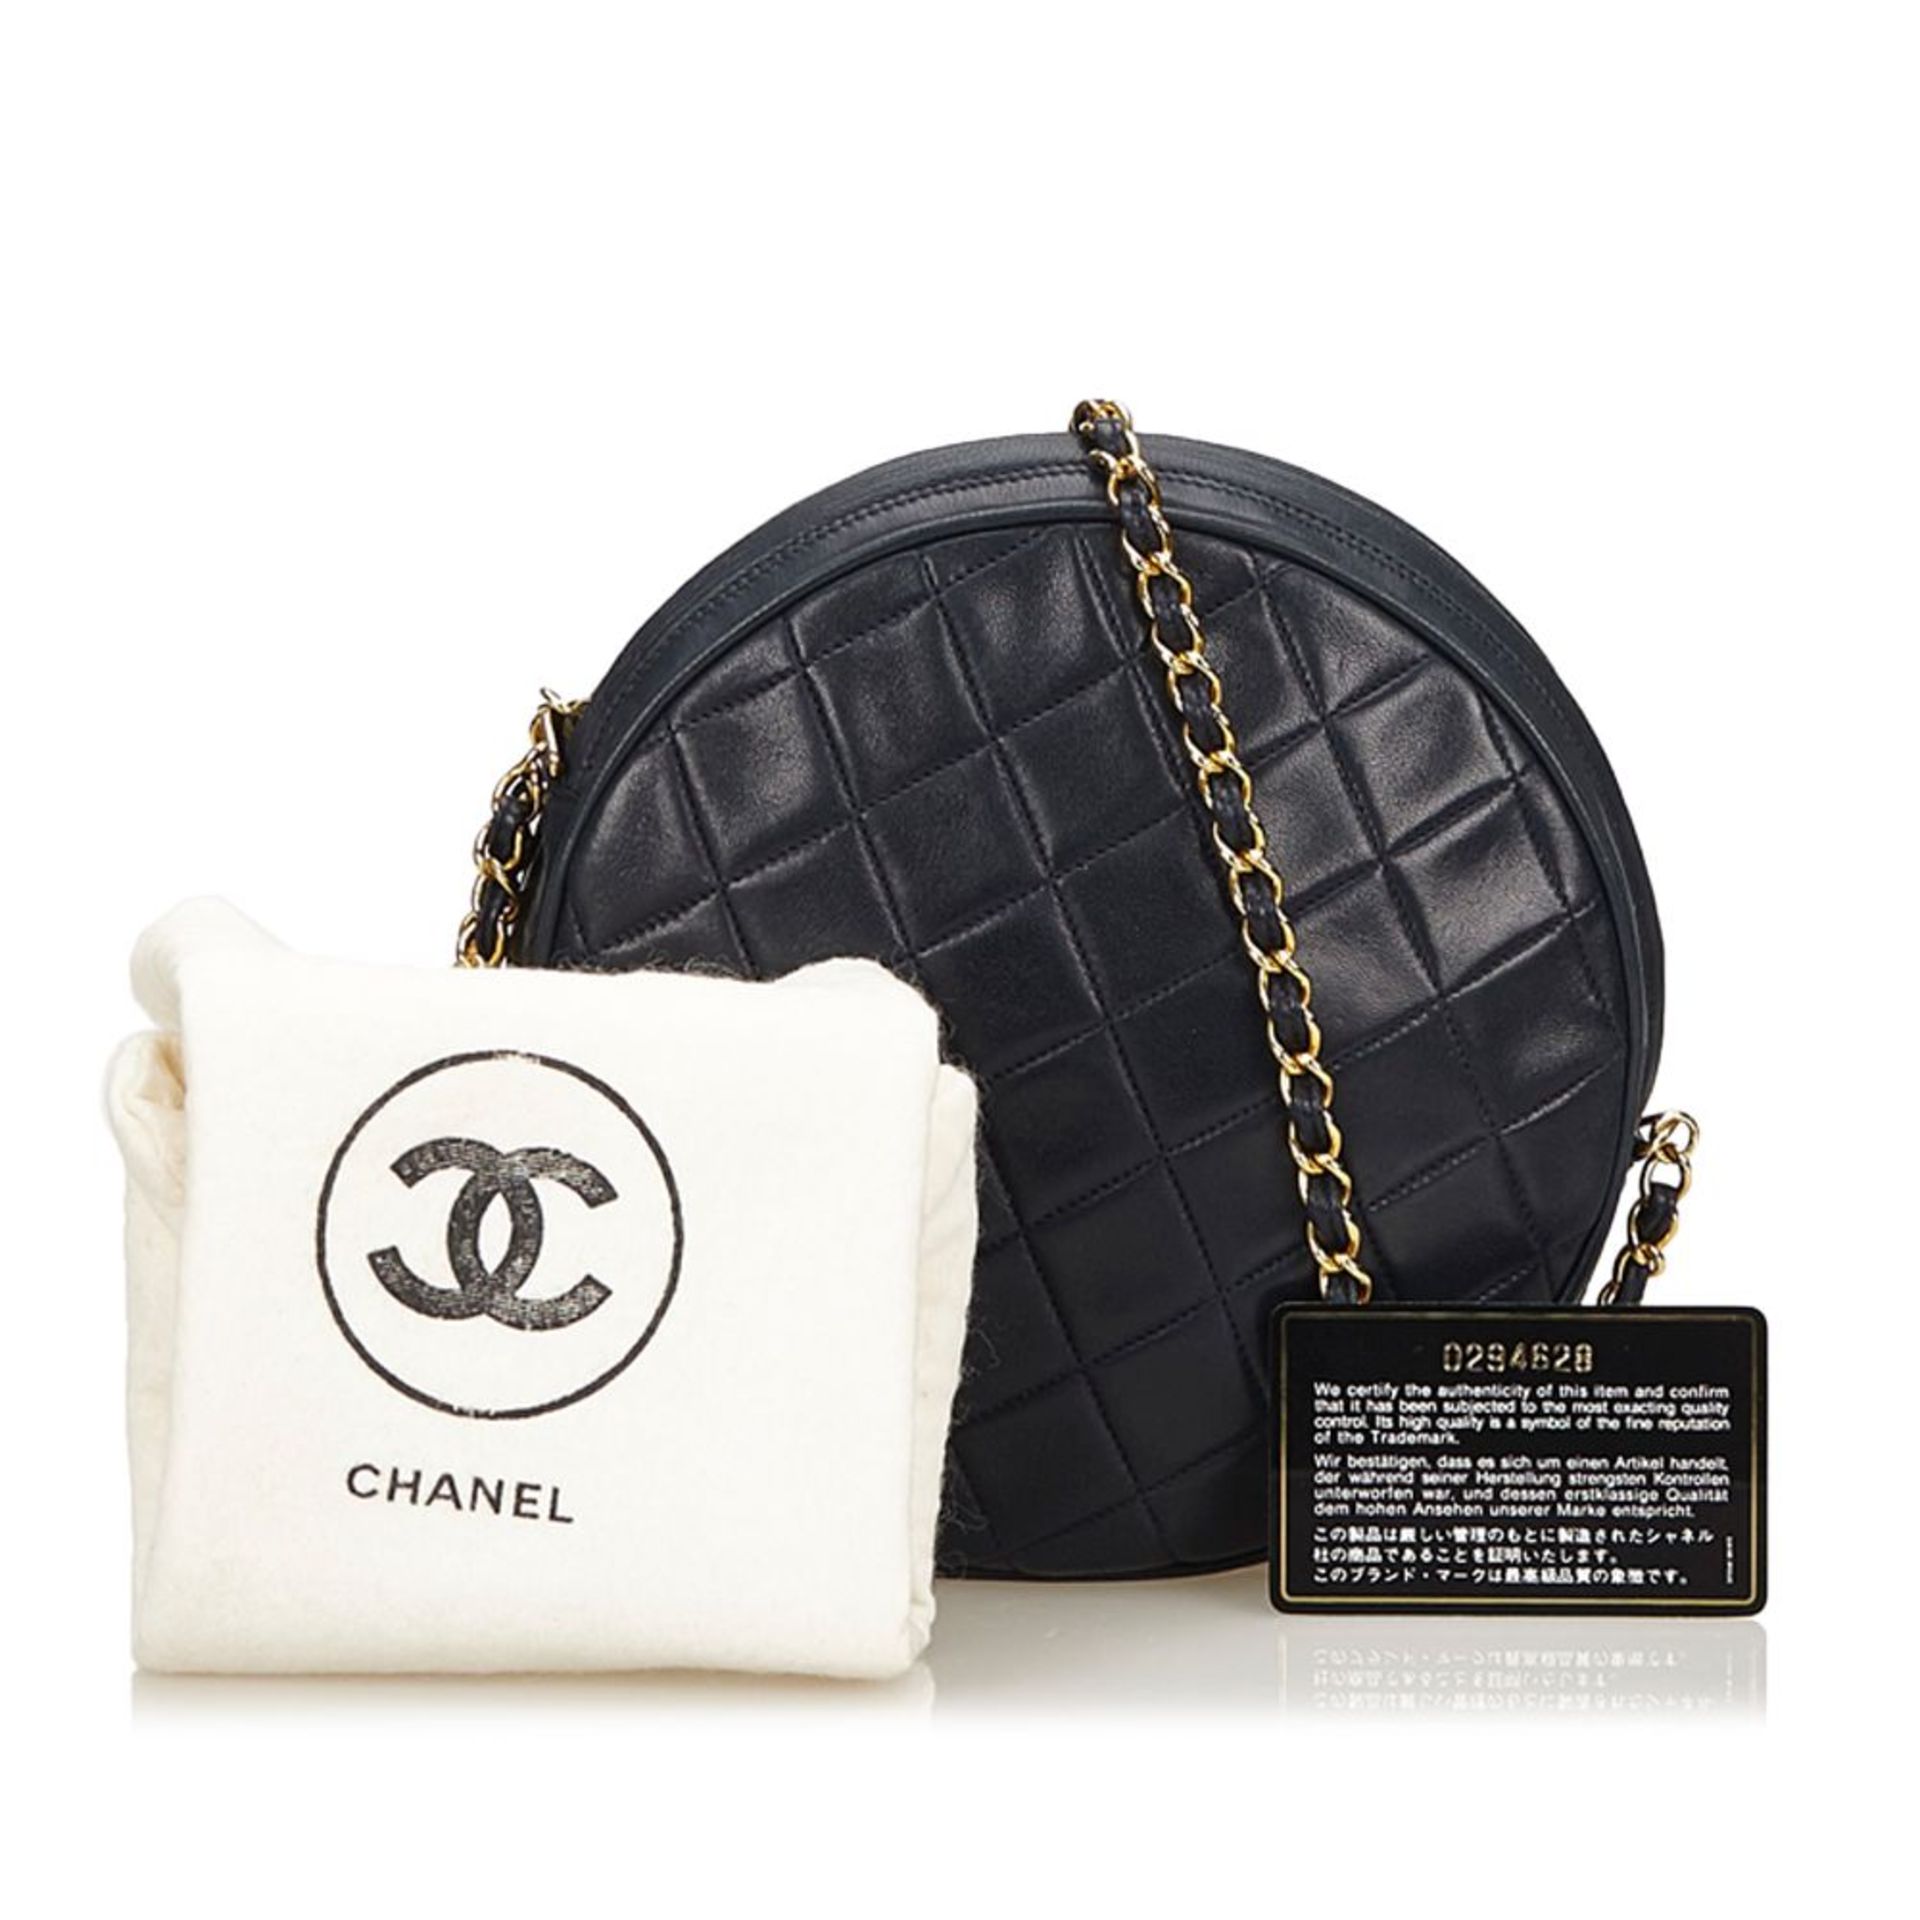 A Chanel matelassé tassel lambskin leather handbag,this shoulder bag features a lambskin leather - Image 3 of 3